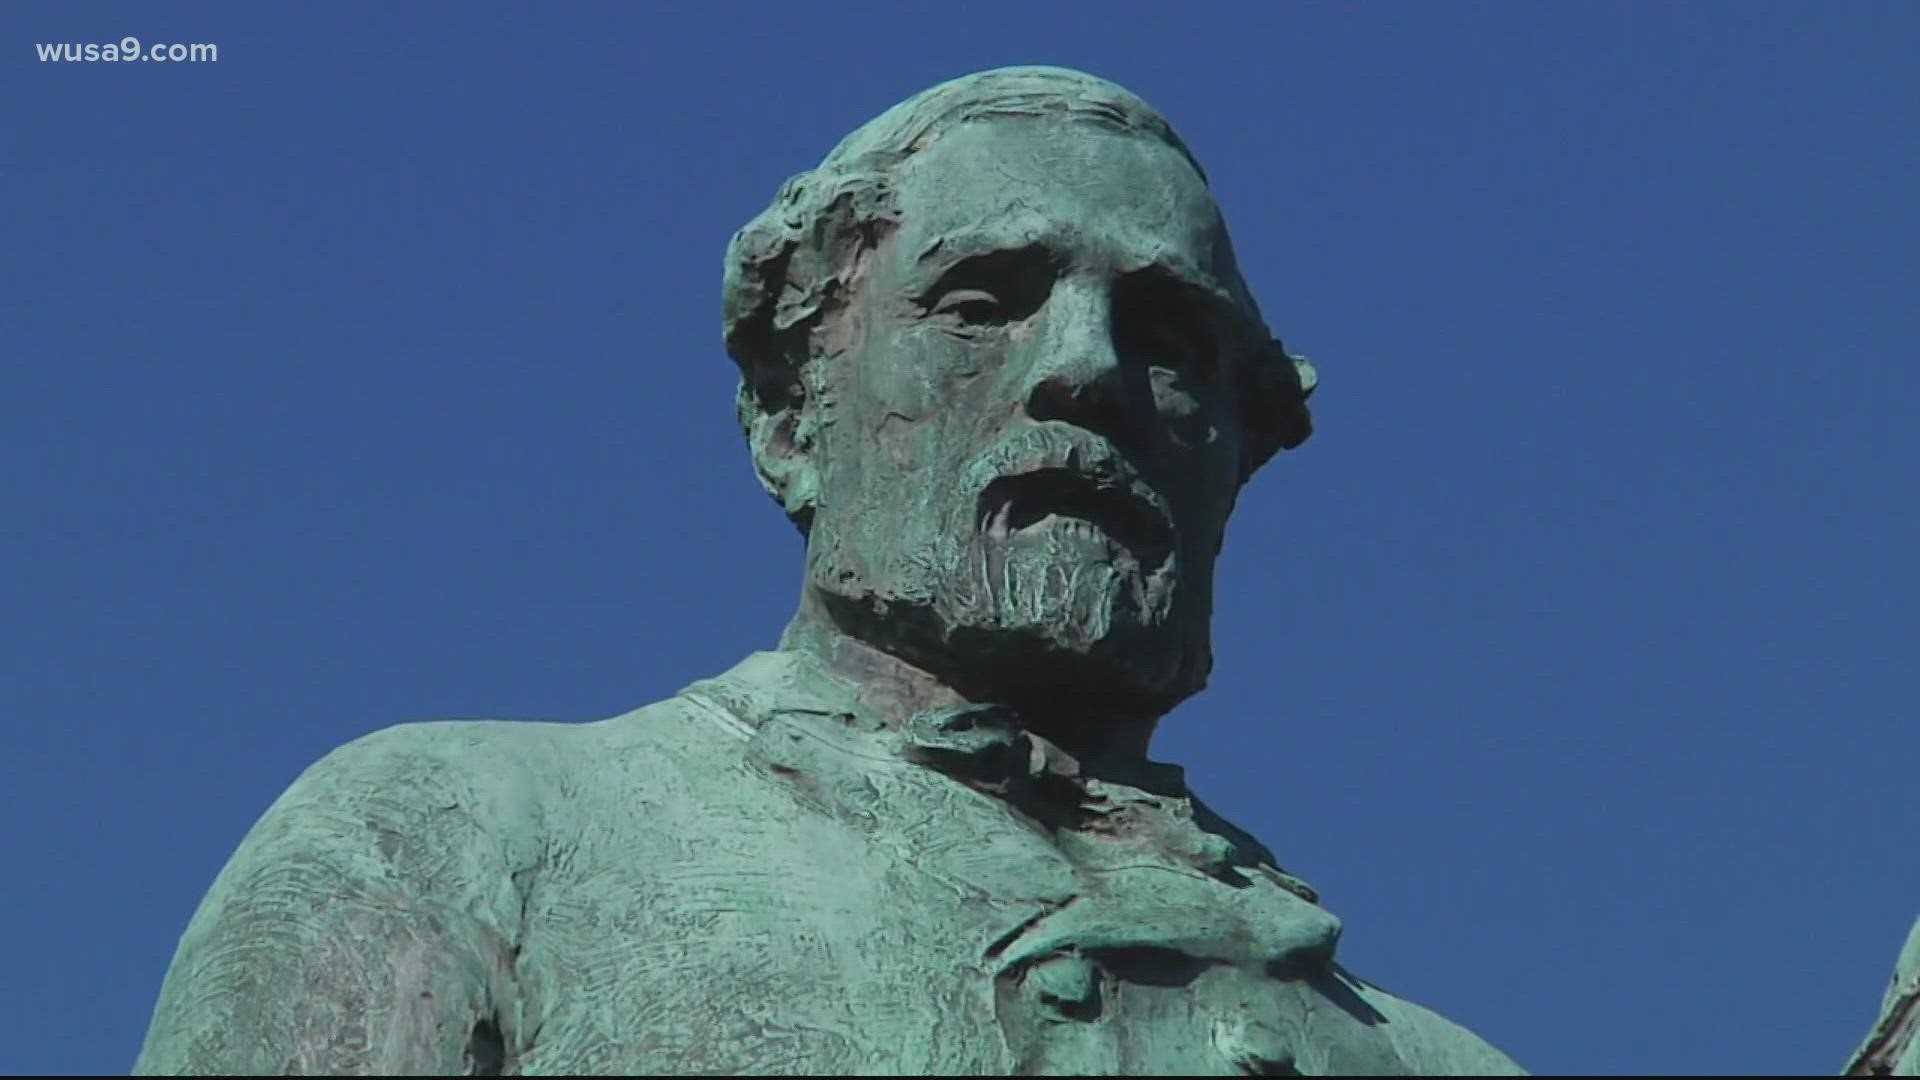 Richmond's Robert E. Lee statue will be removed Wednesday